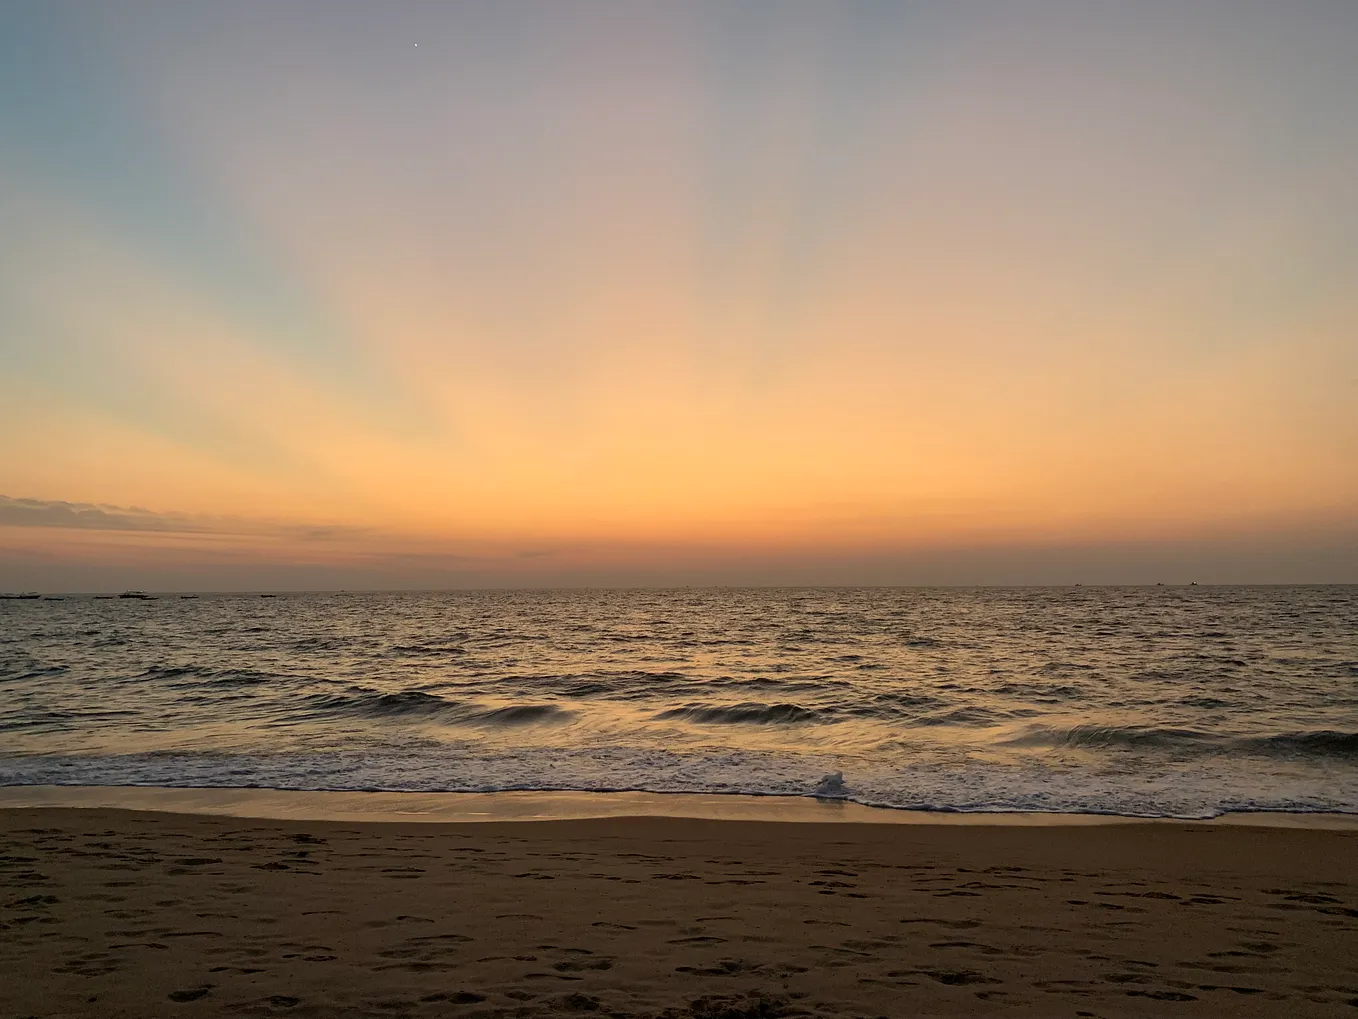 a sunset on the beach, taken from the coast with brilliant rays of sunlight visible